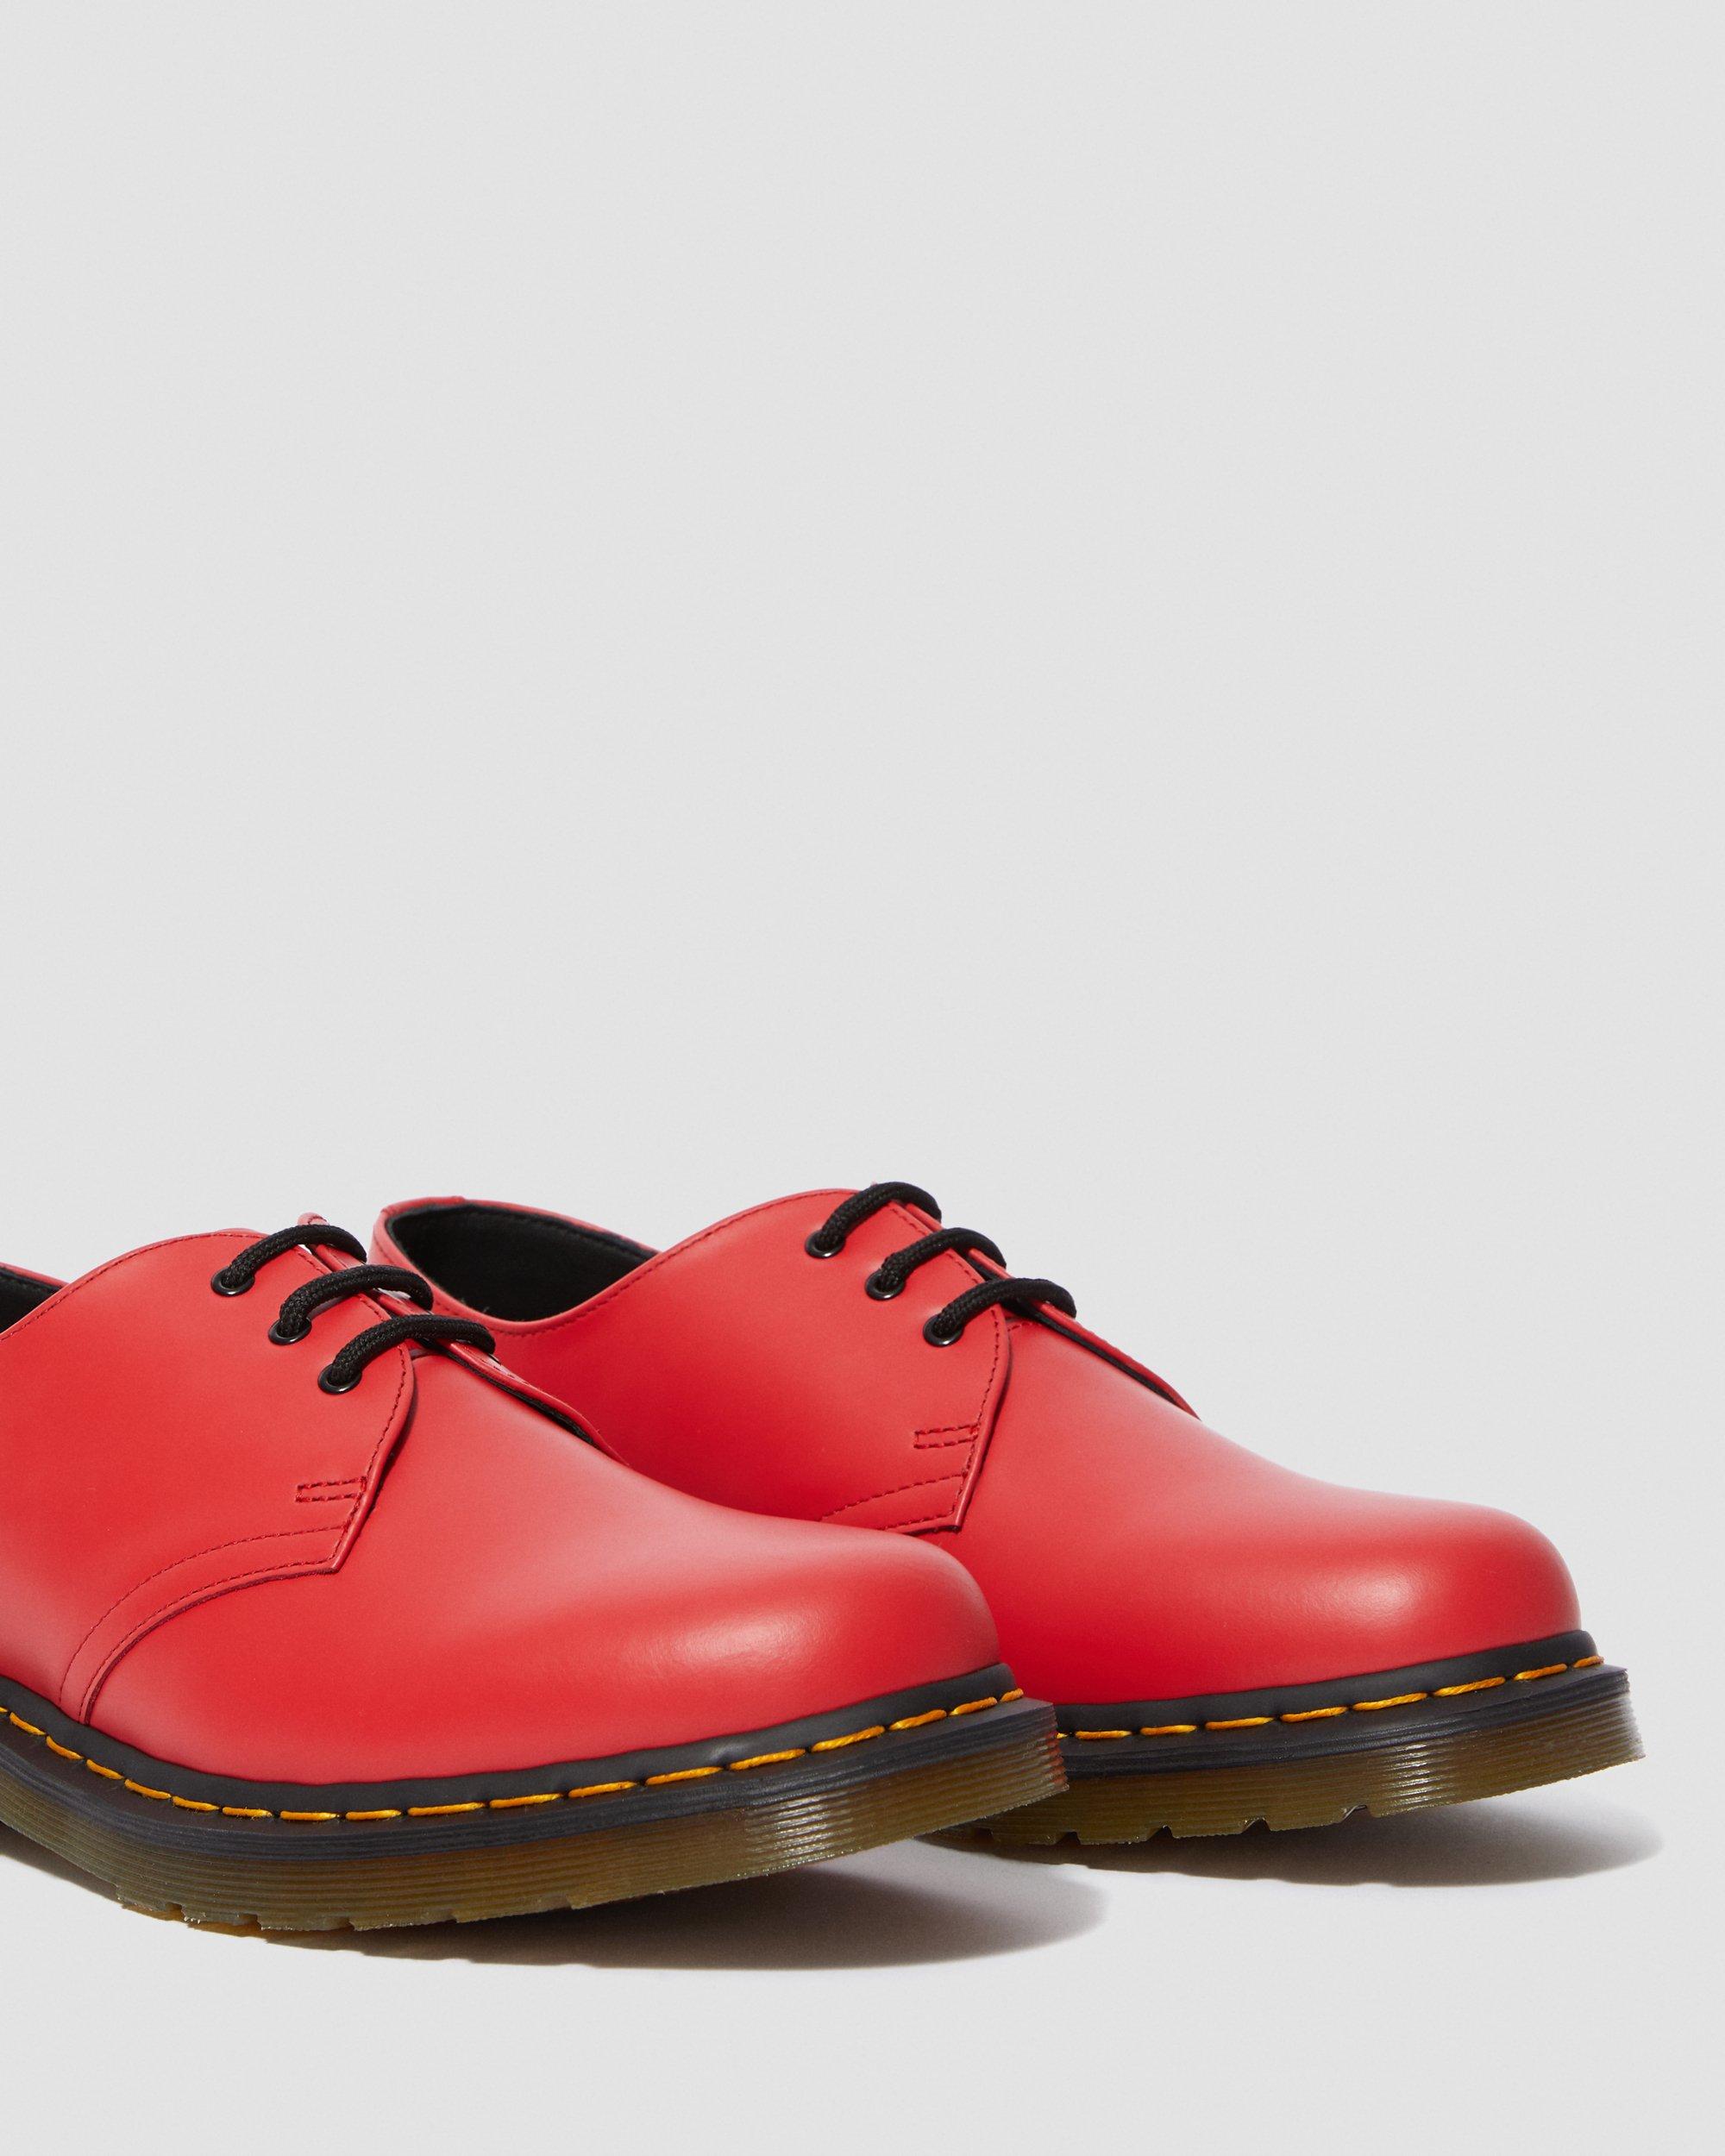 1461 Smooth Leather Oxford Shoes in Red